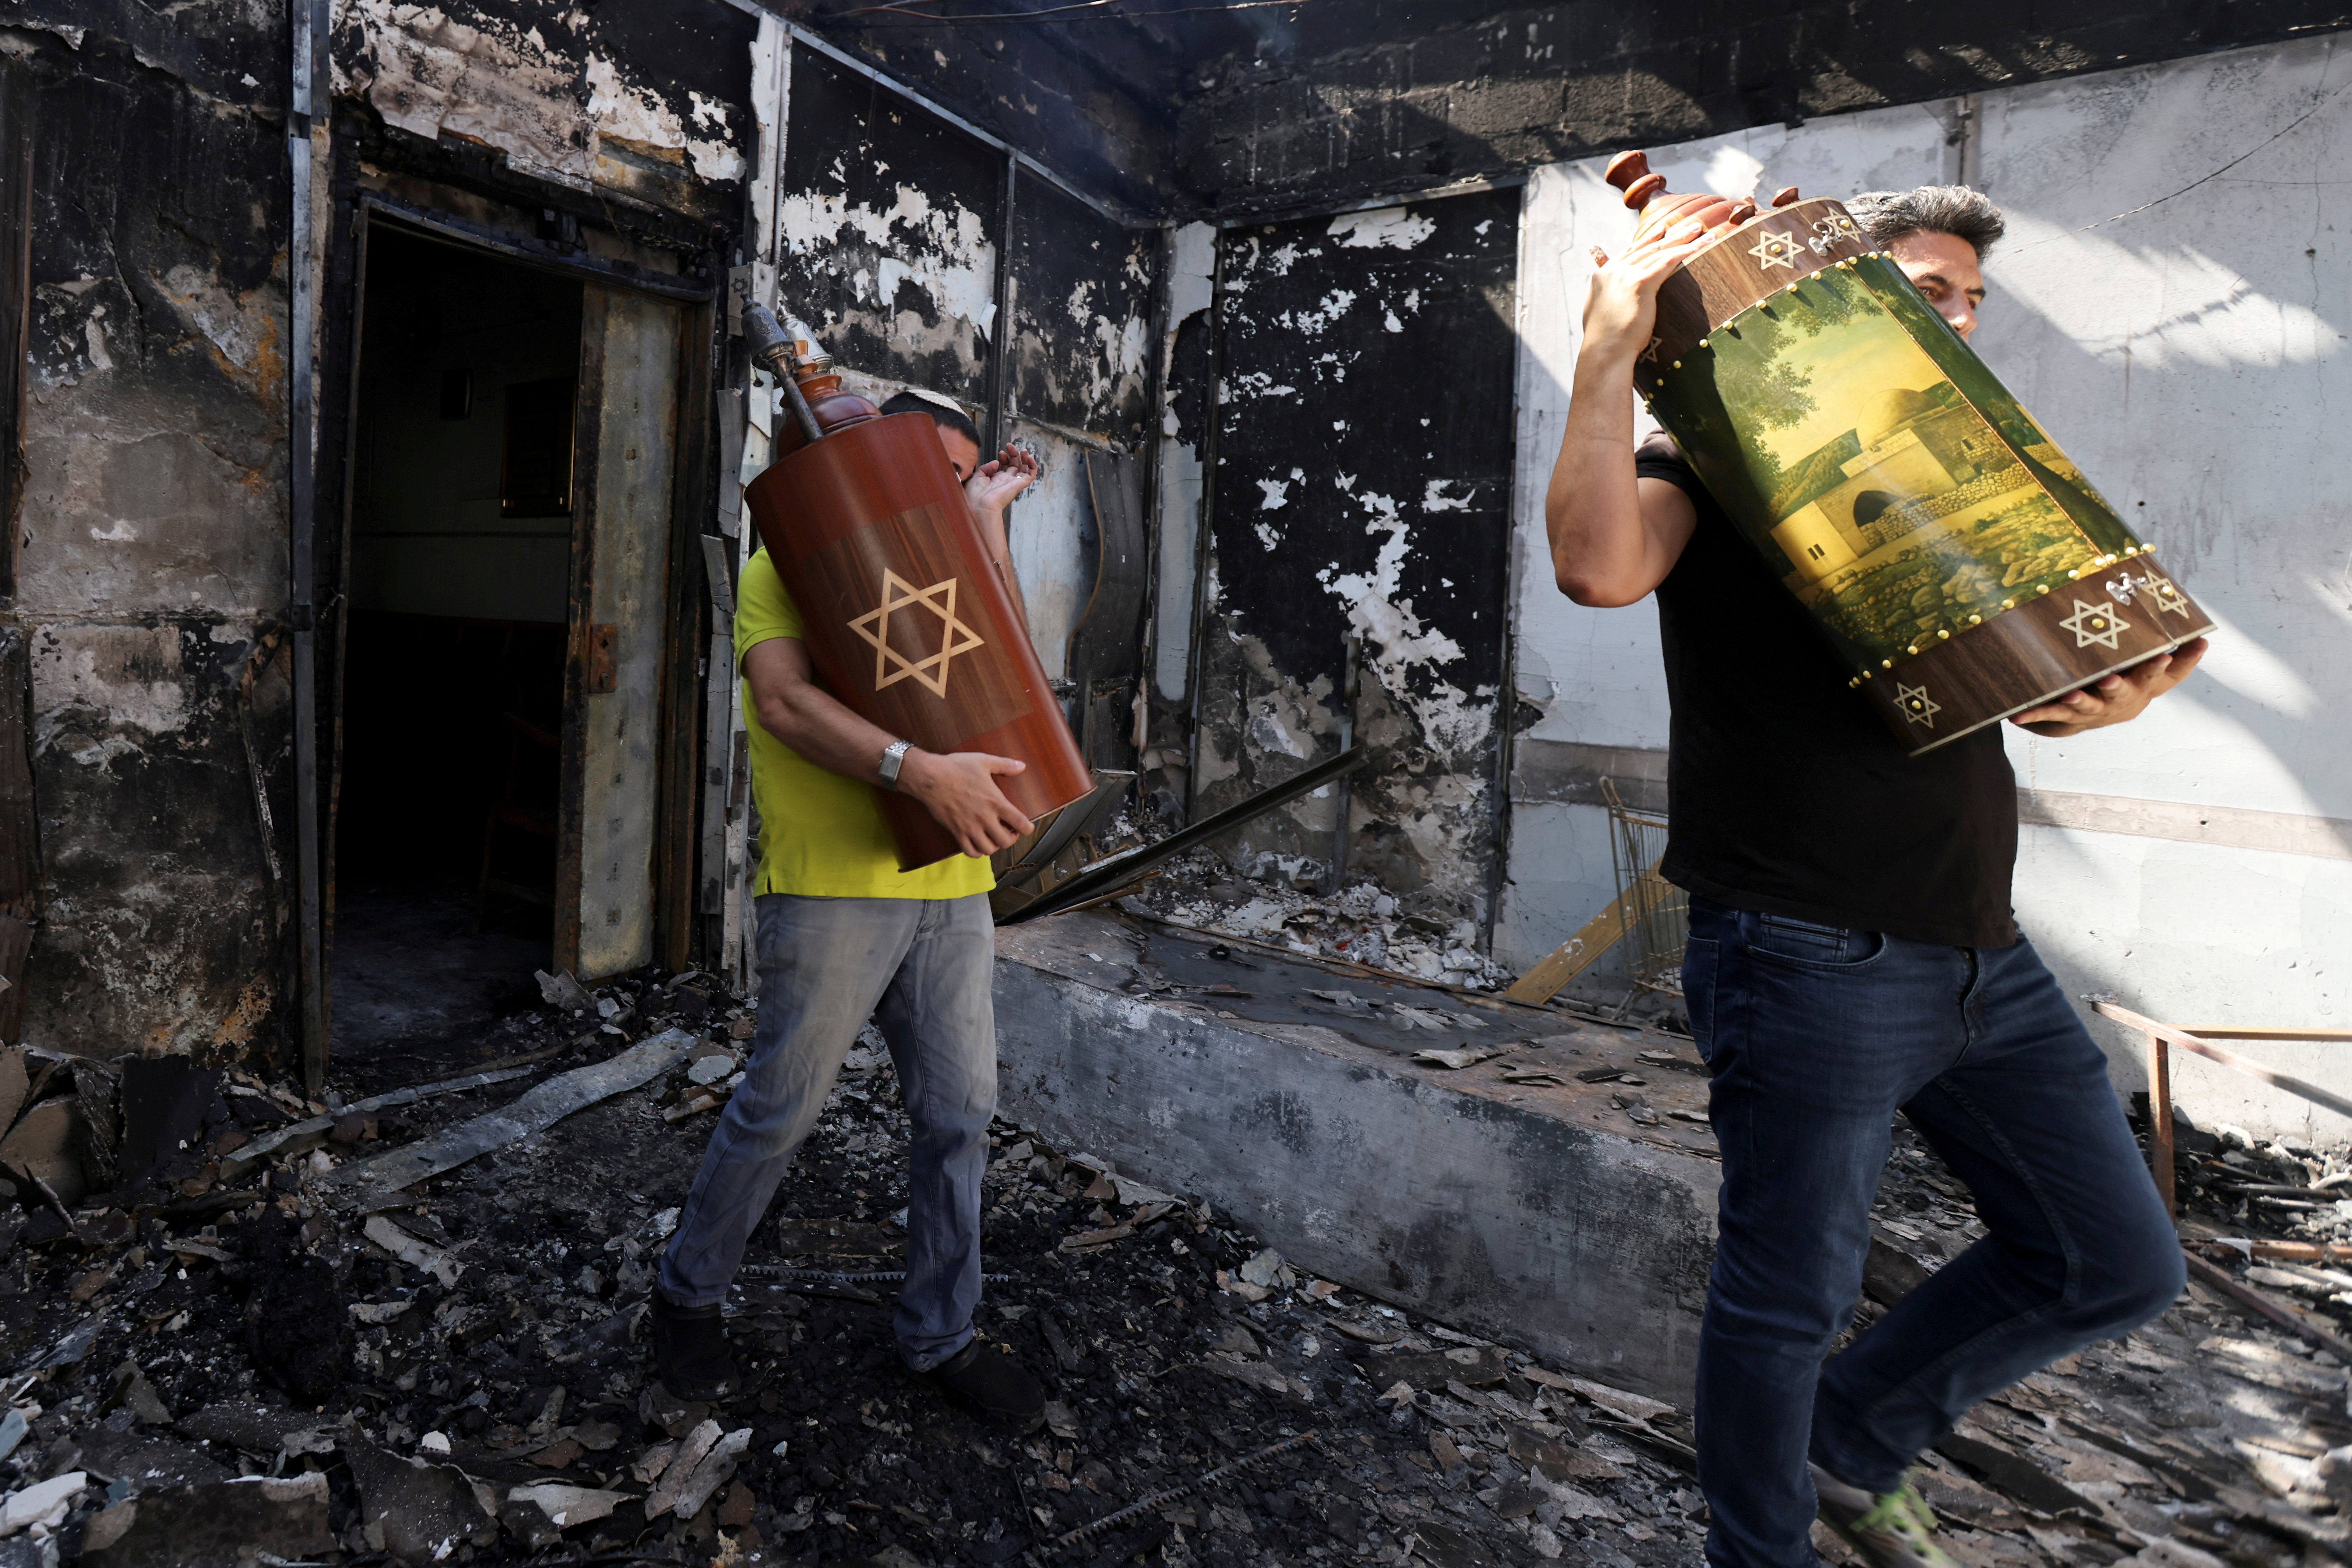 Torah scrolls, Jewish holy scriptures, are removed from a synagogue which was torched during violent confrontations in the city of Lod, Israel between Israeli Arab demonstrators and police, amid high tensions over hostilities between Israel and Gaza militants and tensions in Jerusalem May 12, 2021. REUTERS/Ronen Zvulun